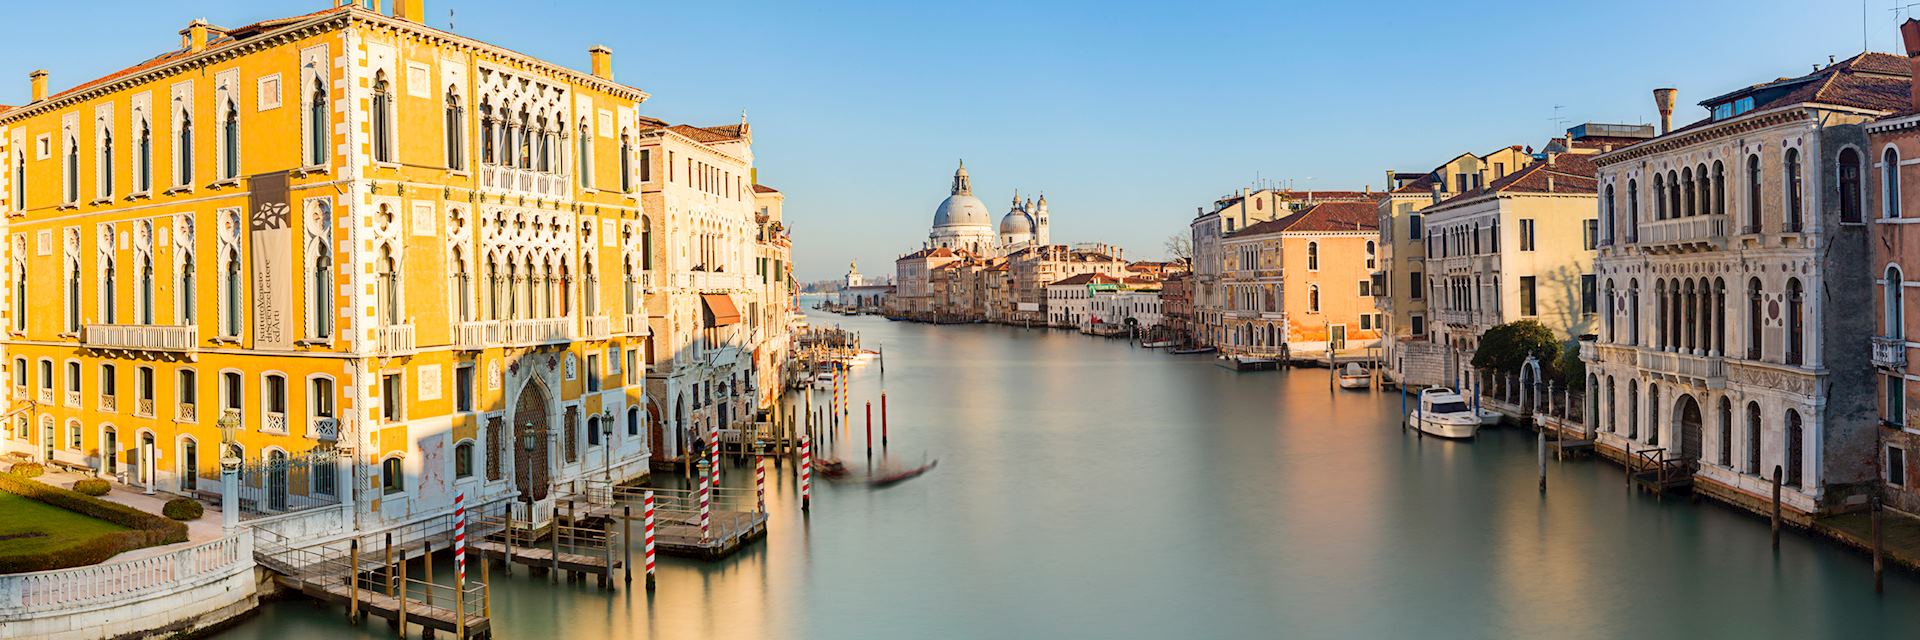 Full View from Accademia Bridge on Grand Canal, Venice, Italy